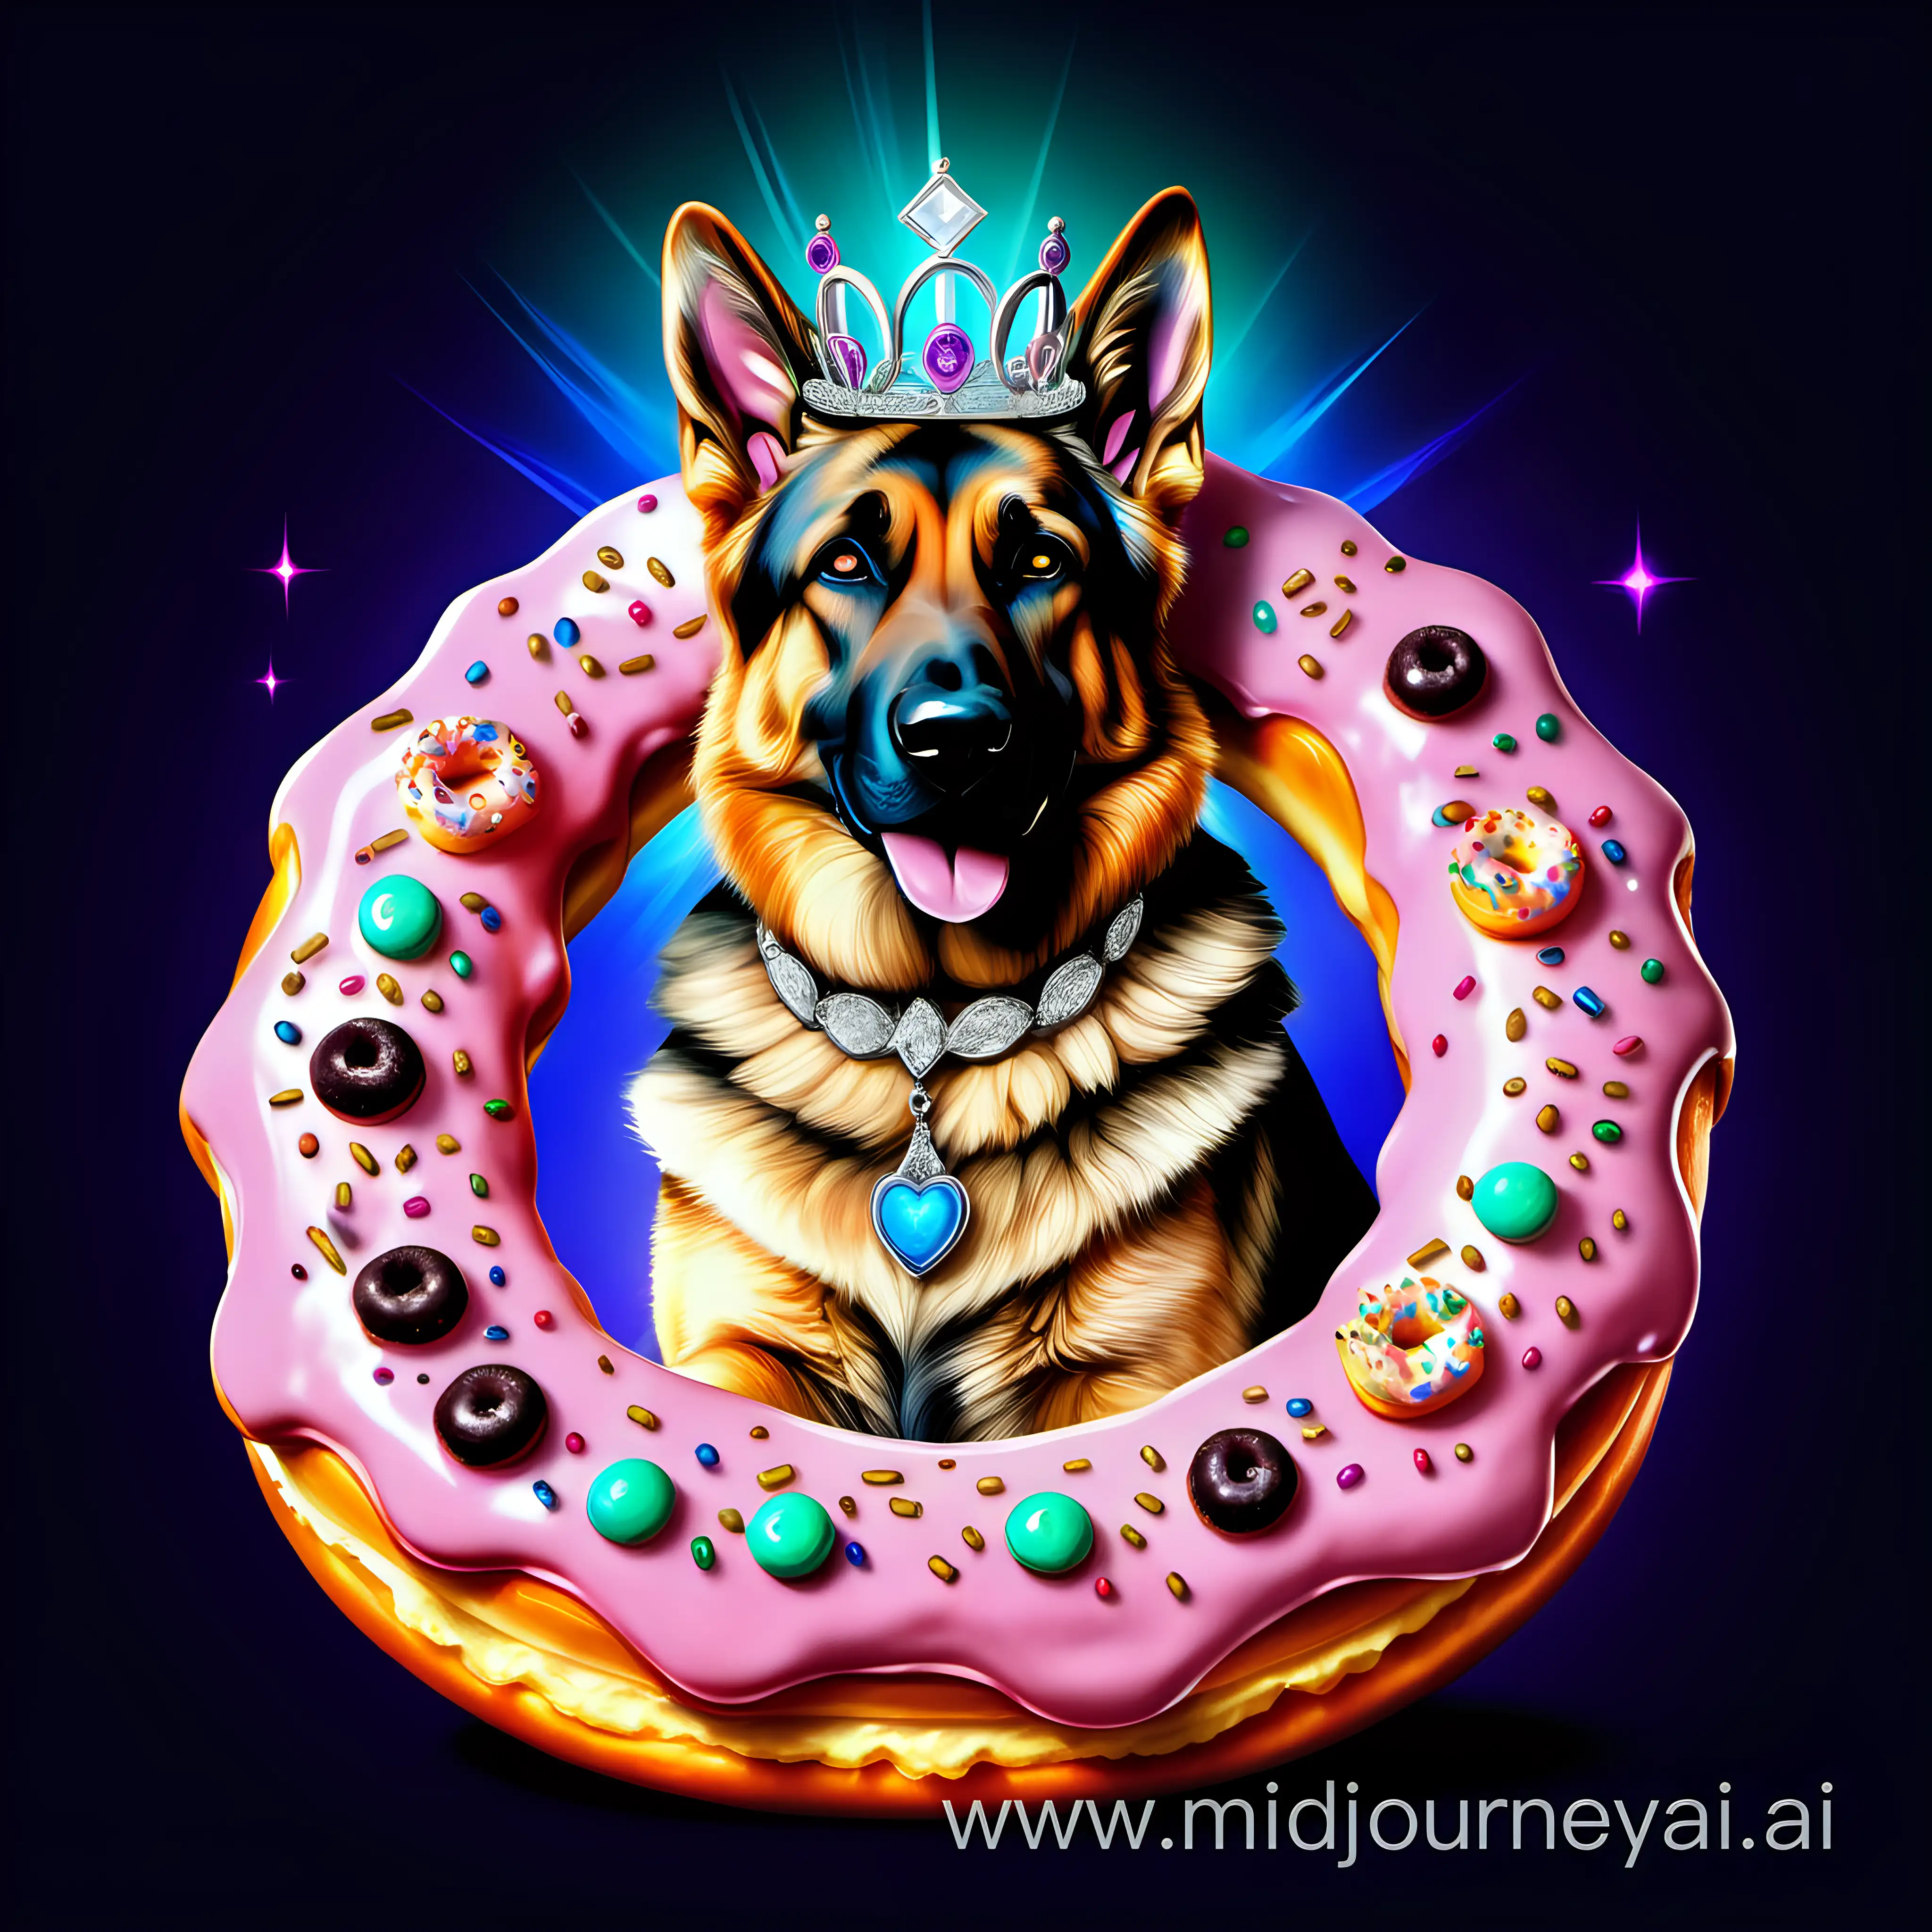 Fantasy themed Majestic German Shepherd glowing wearing jewelry and lording over a donut. Also wearing a tiara